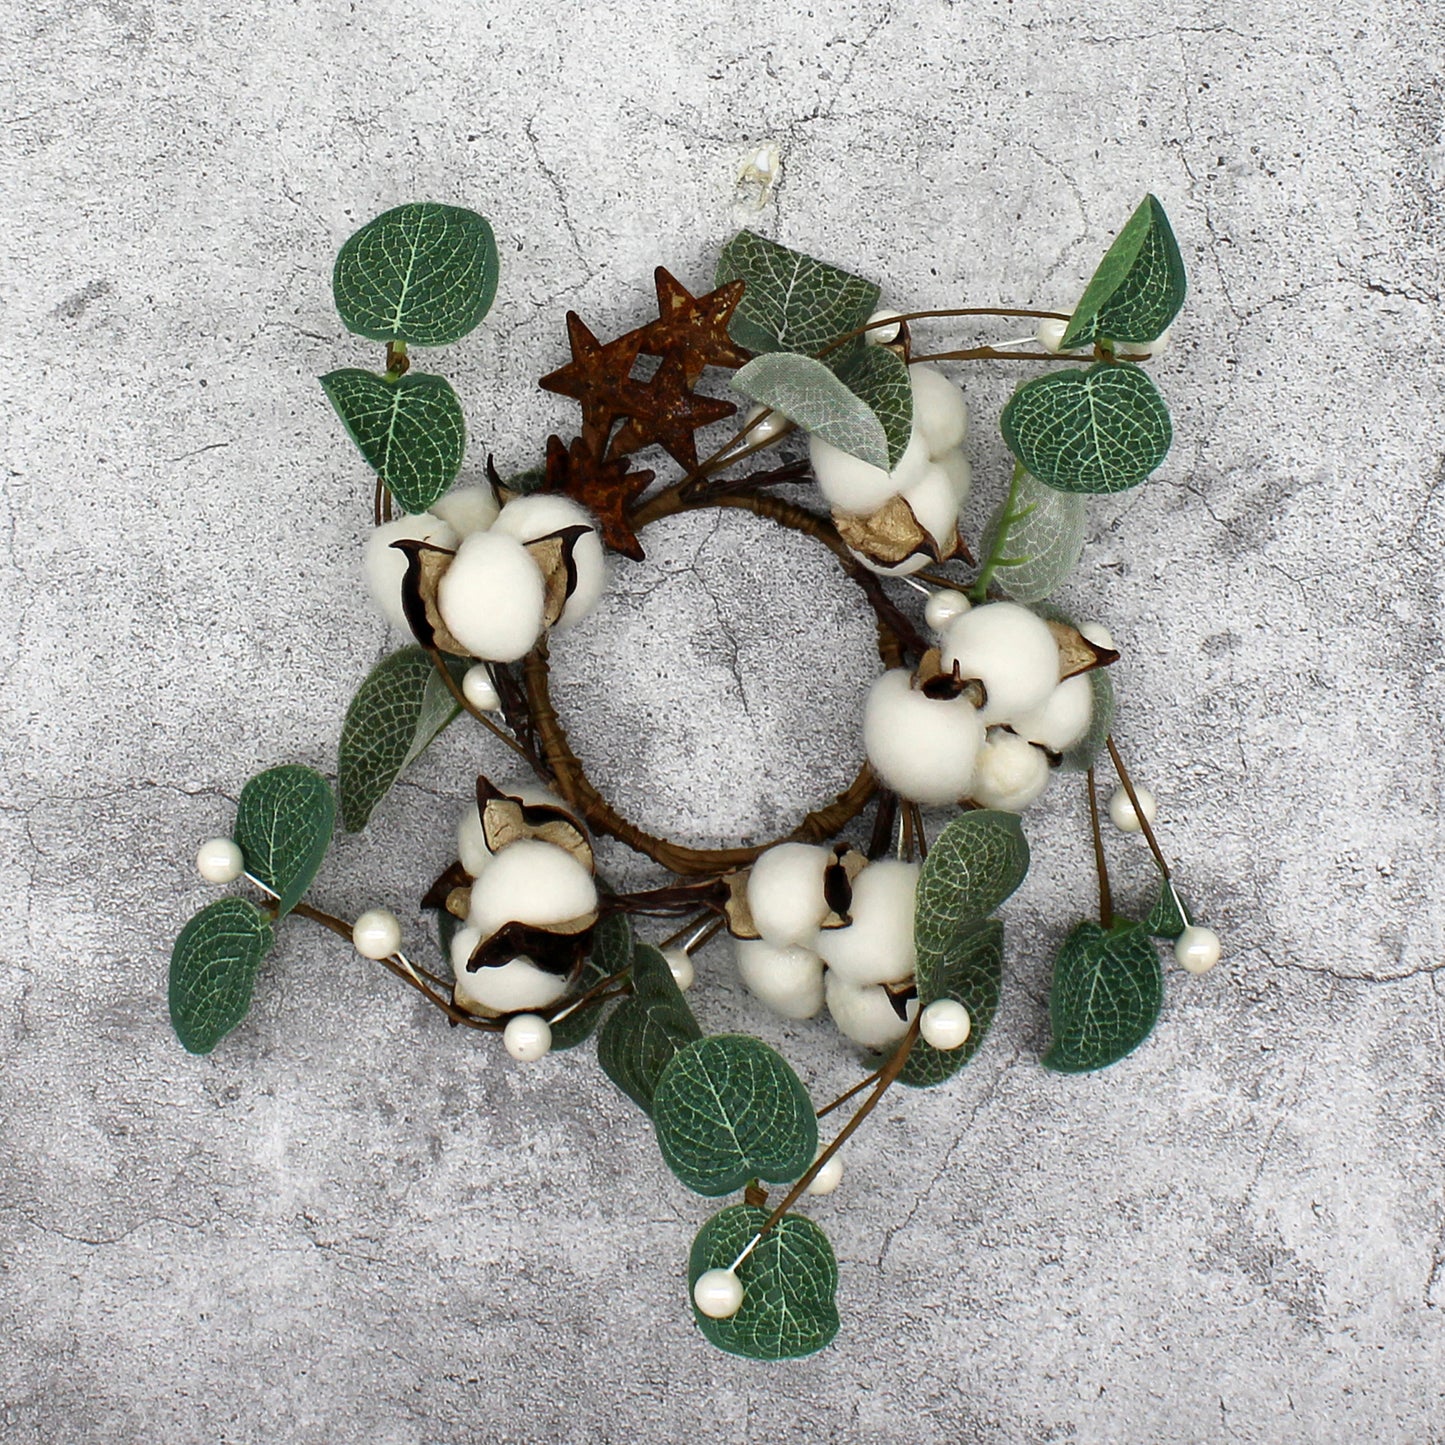 CVHOMEDECO. Primitives Rustic Pod Pip Berries and Eucalyptus Leaves with Rusty Barn Stars Wreath, 9 Inch